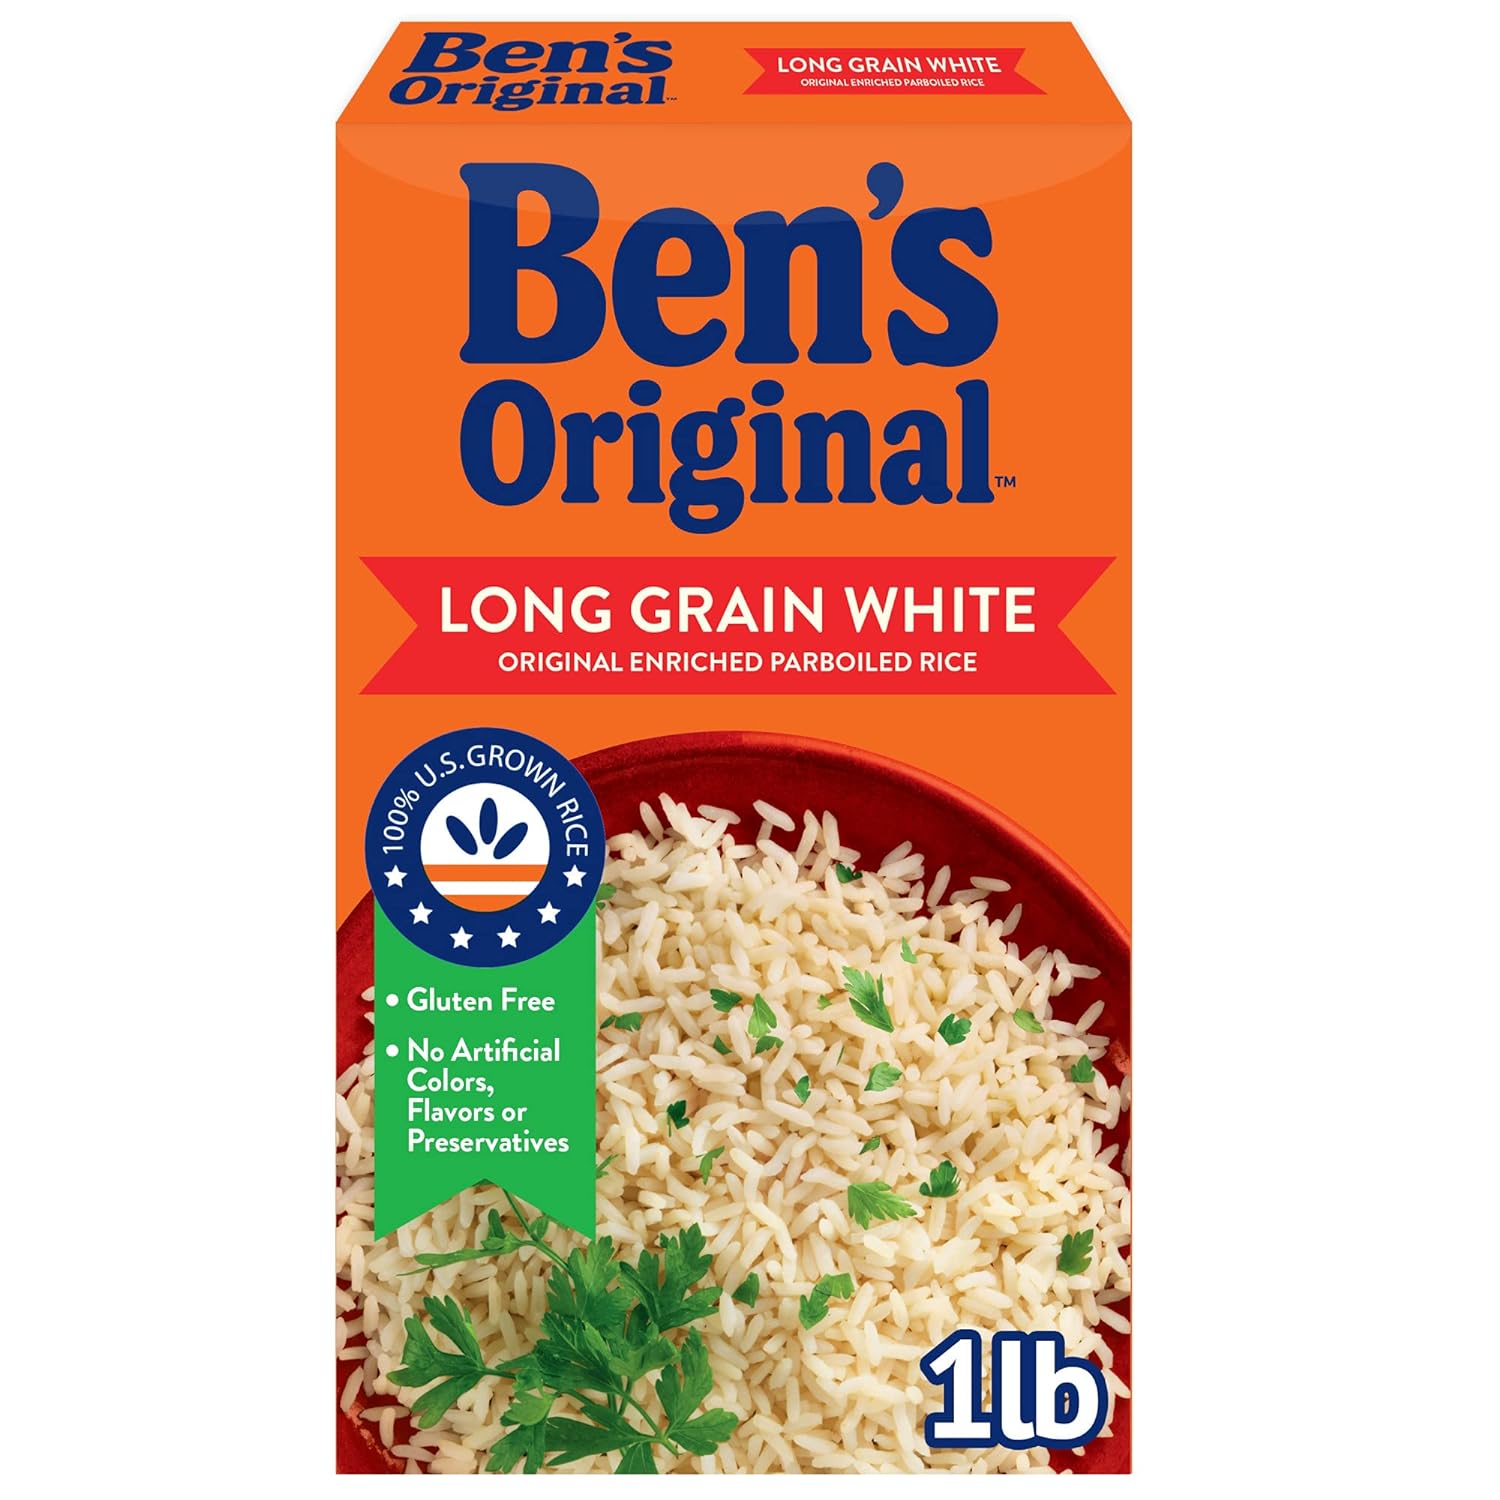 BEN'S ORIGINAL Converted Brand Enriched Long Grain White Rice, Parboiled Rice, 1 lb Box (Pack of 12)